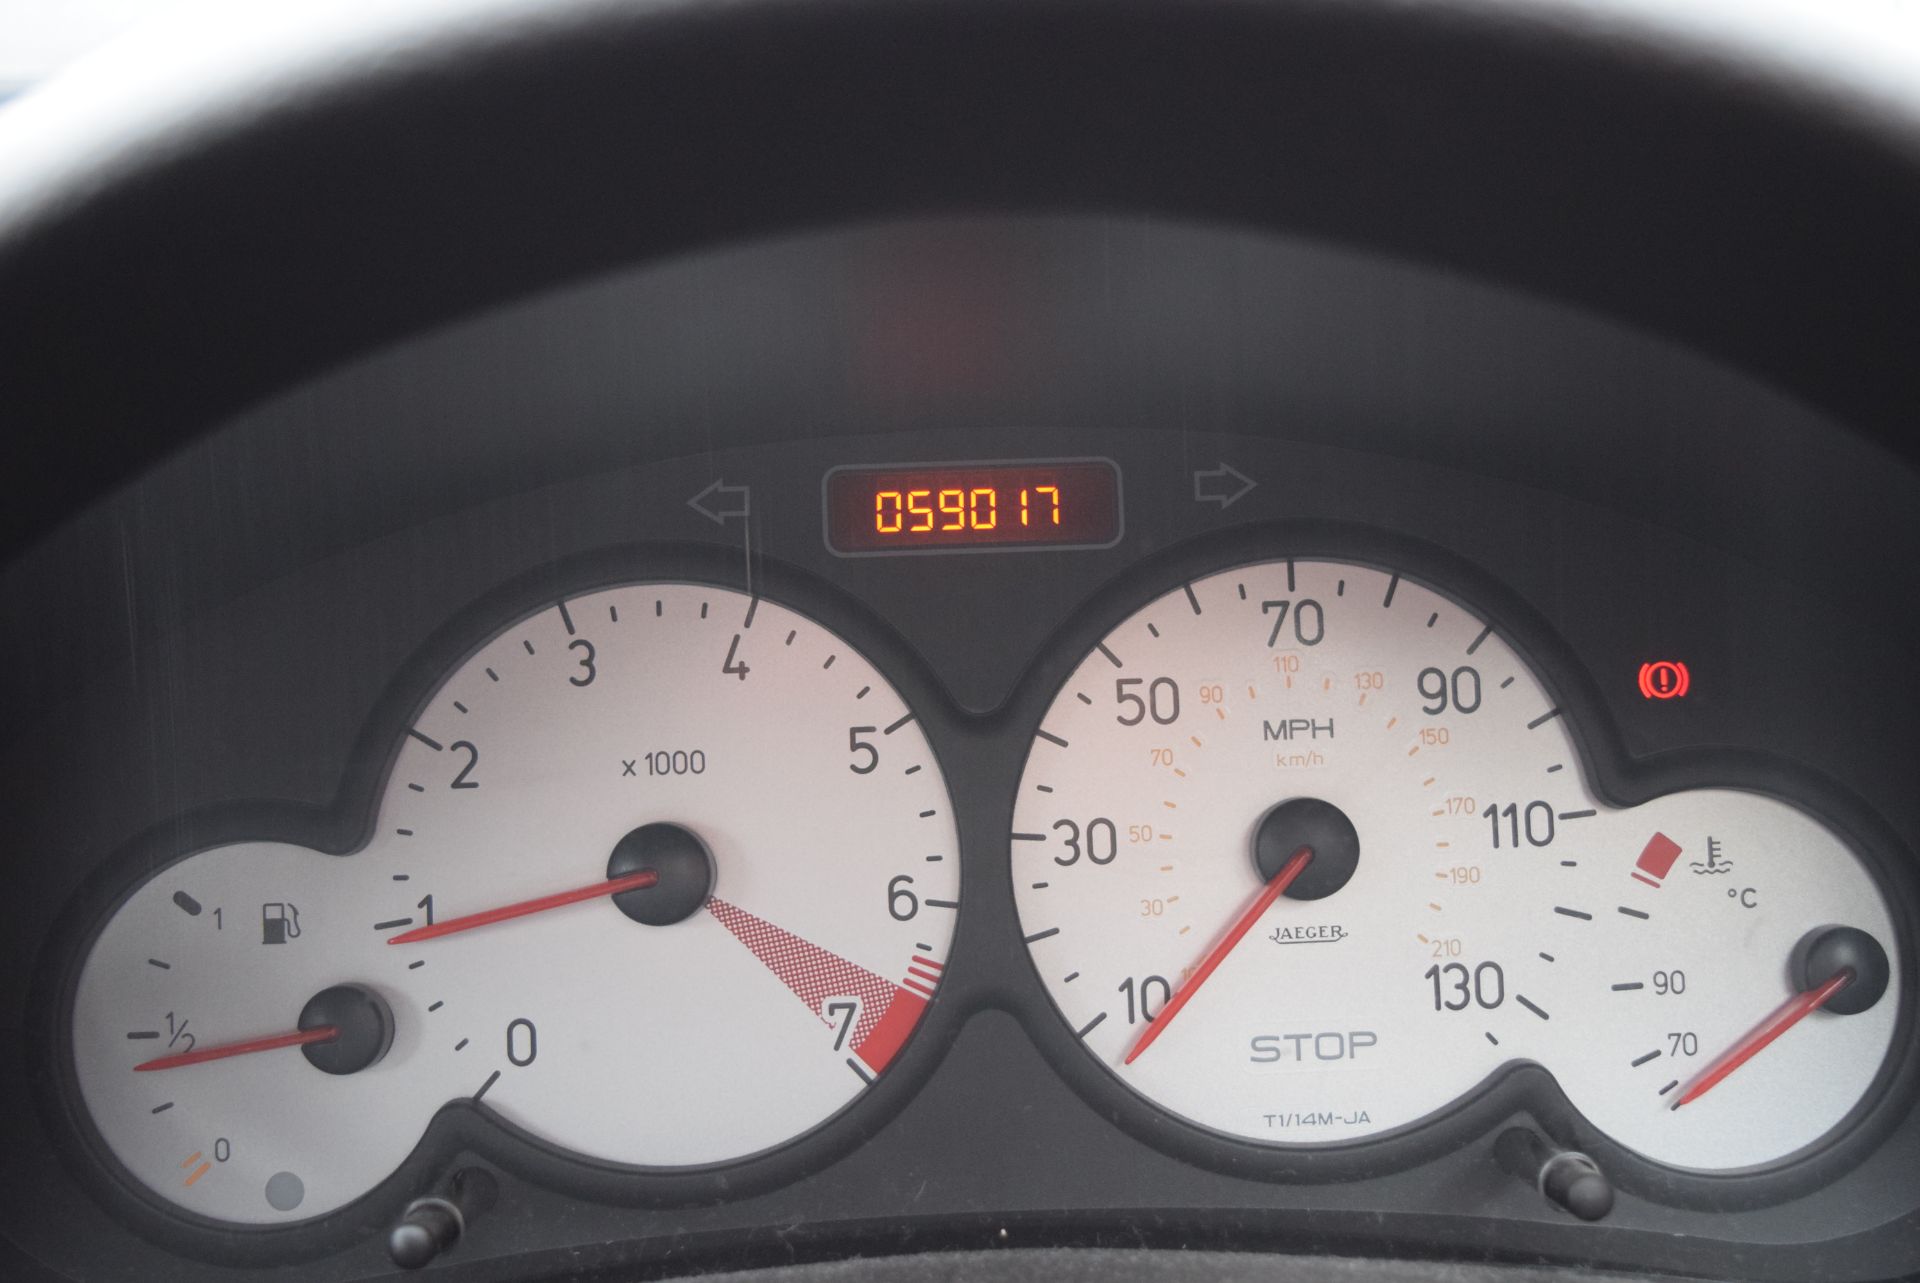 A PEUGEOT 206 S 1.1 Petrol 3-Door Saloon, Registration No. YM05 ATF, First Registered: 30/06/2005, - Image 10 of 10